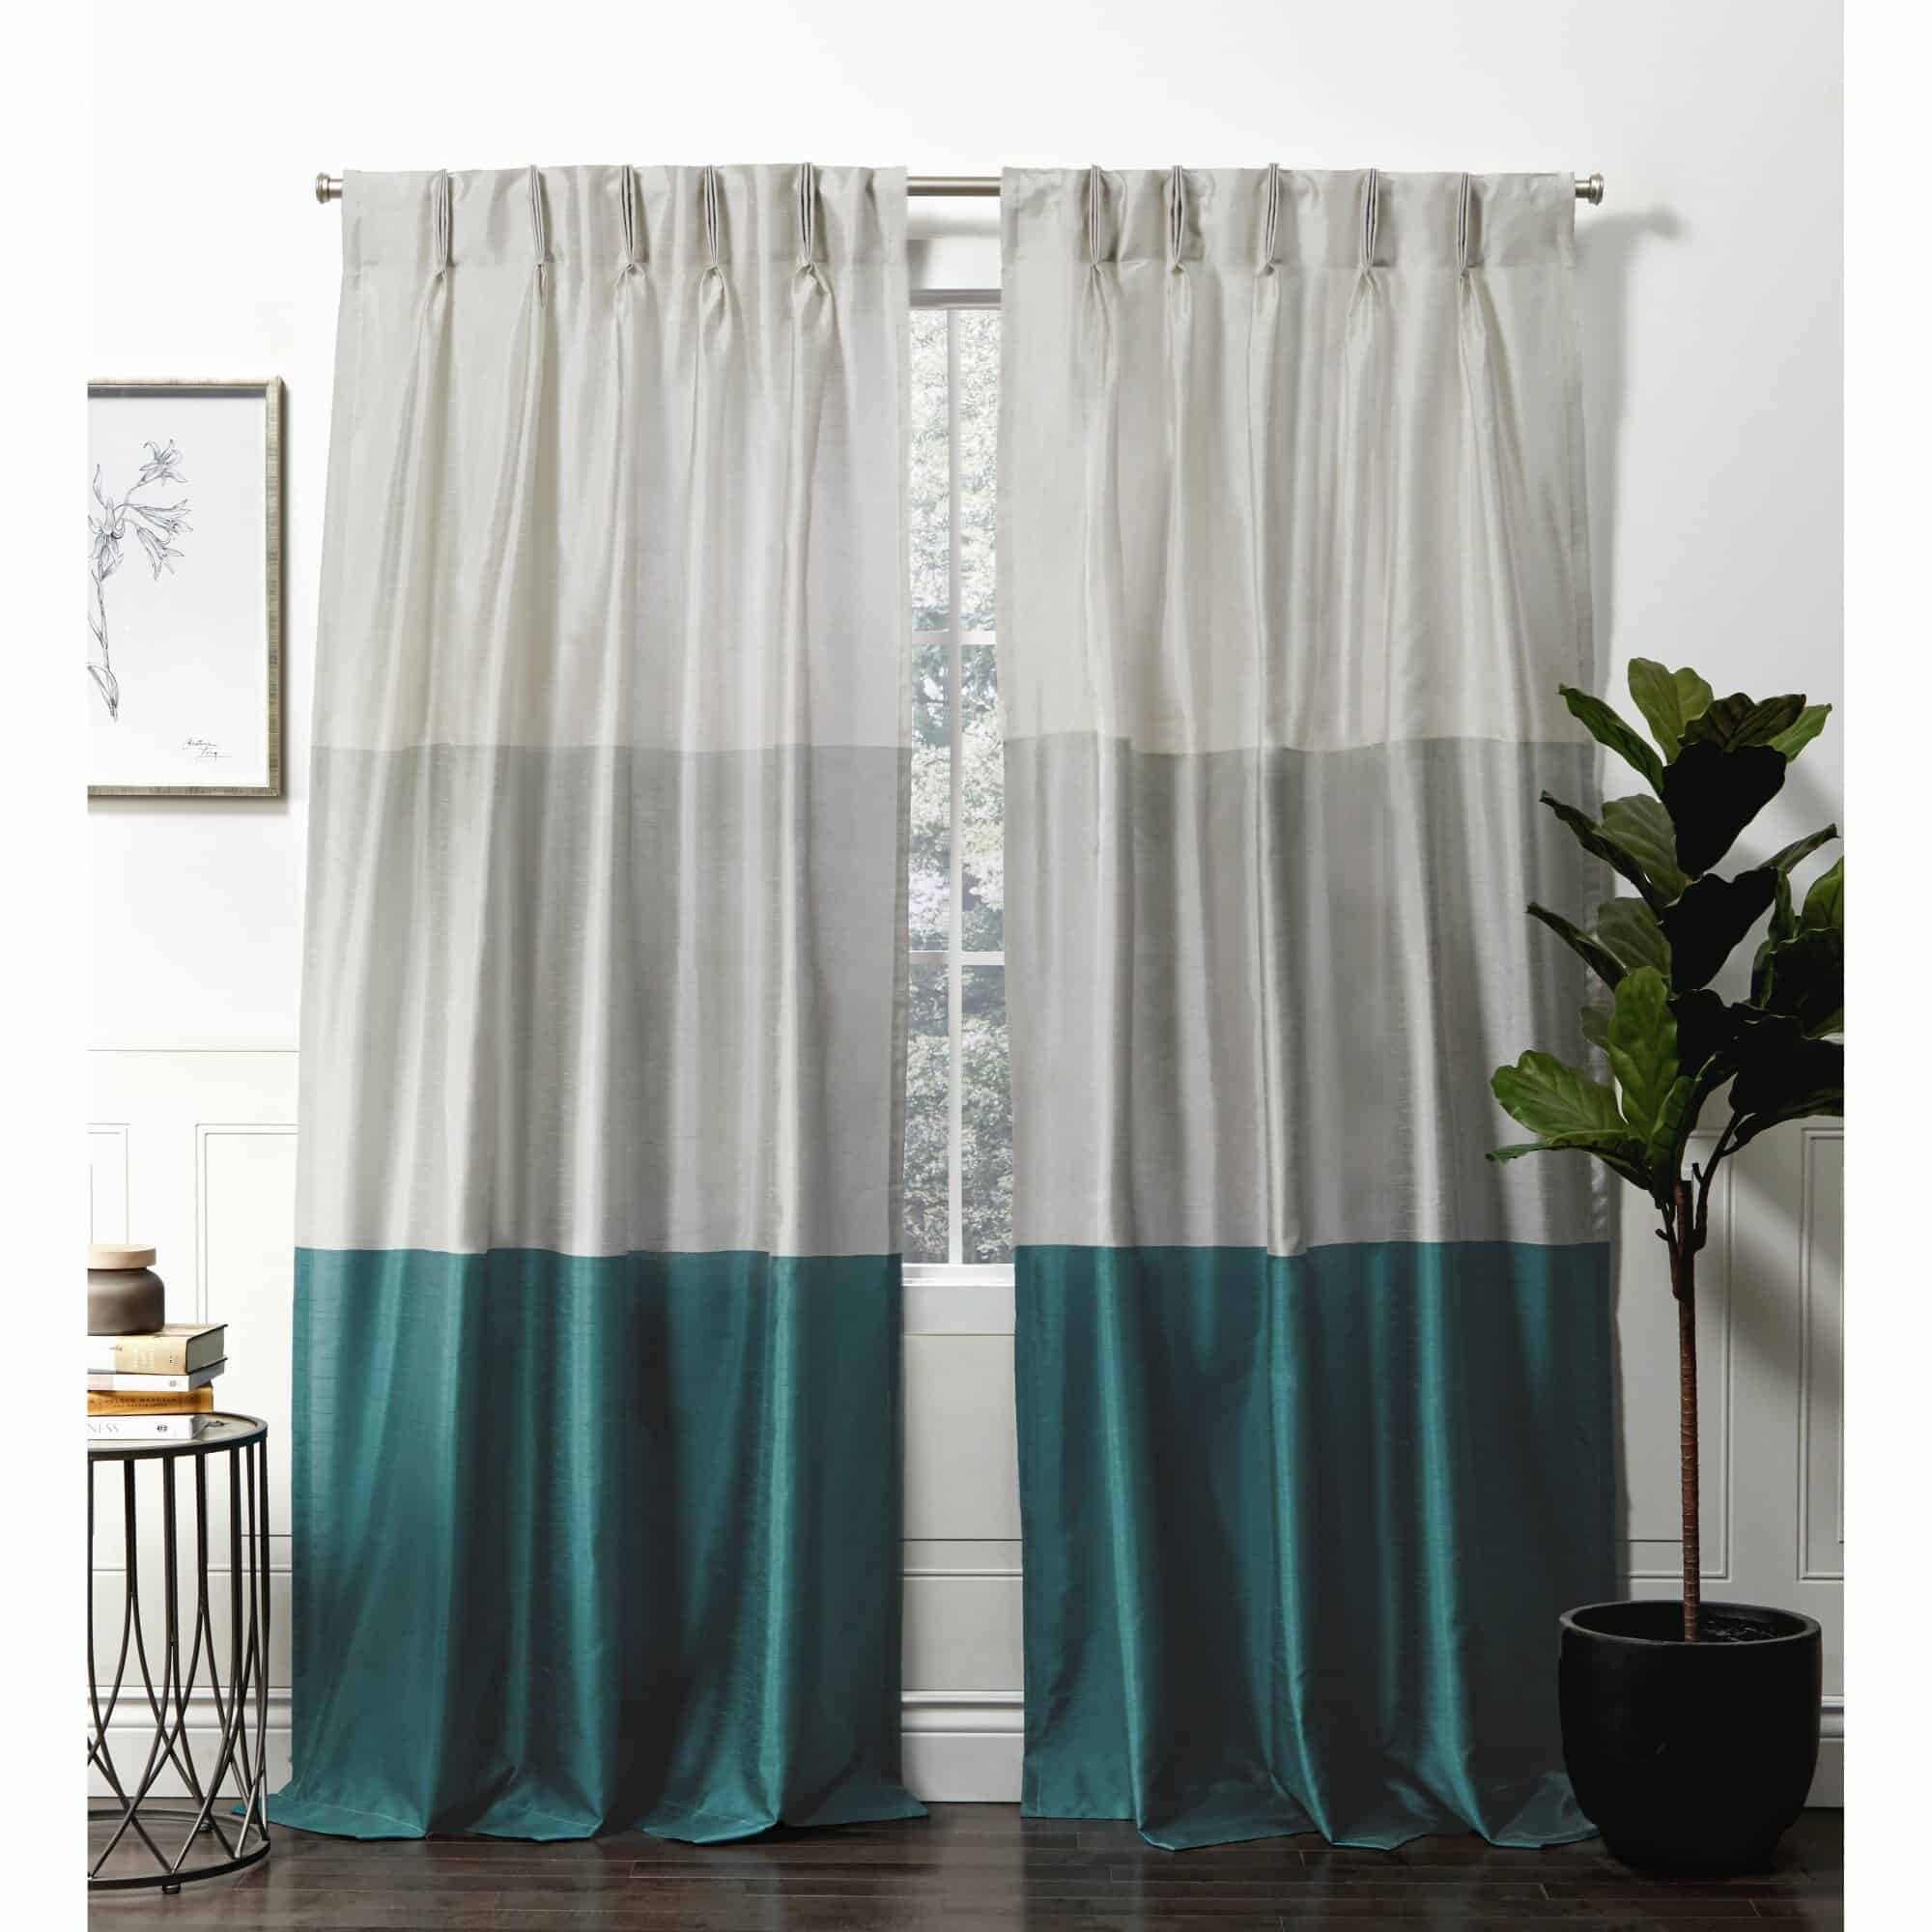 Faux Silk Curtains Are A Luxurious Statement